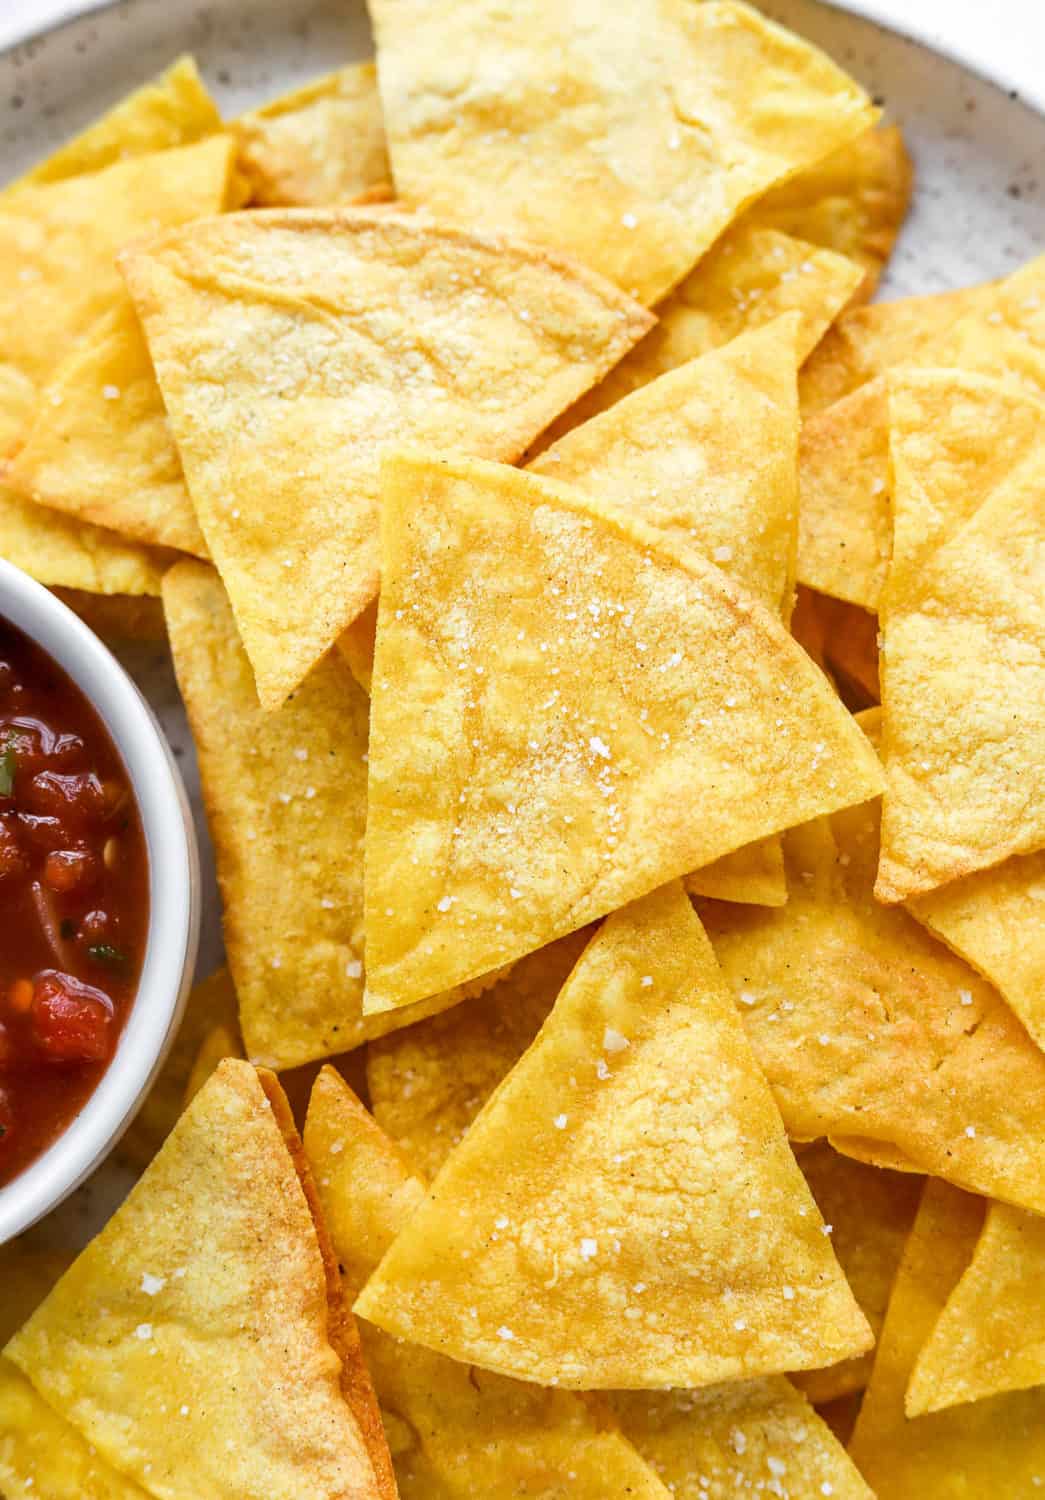 Pile of yellow corn chips with a dish of red salsa next to them. 